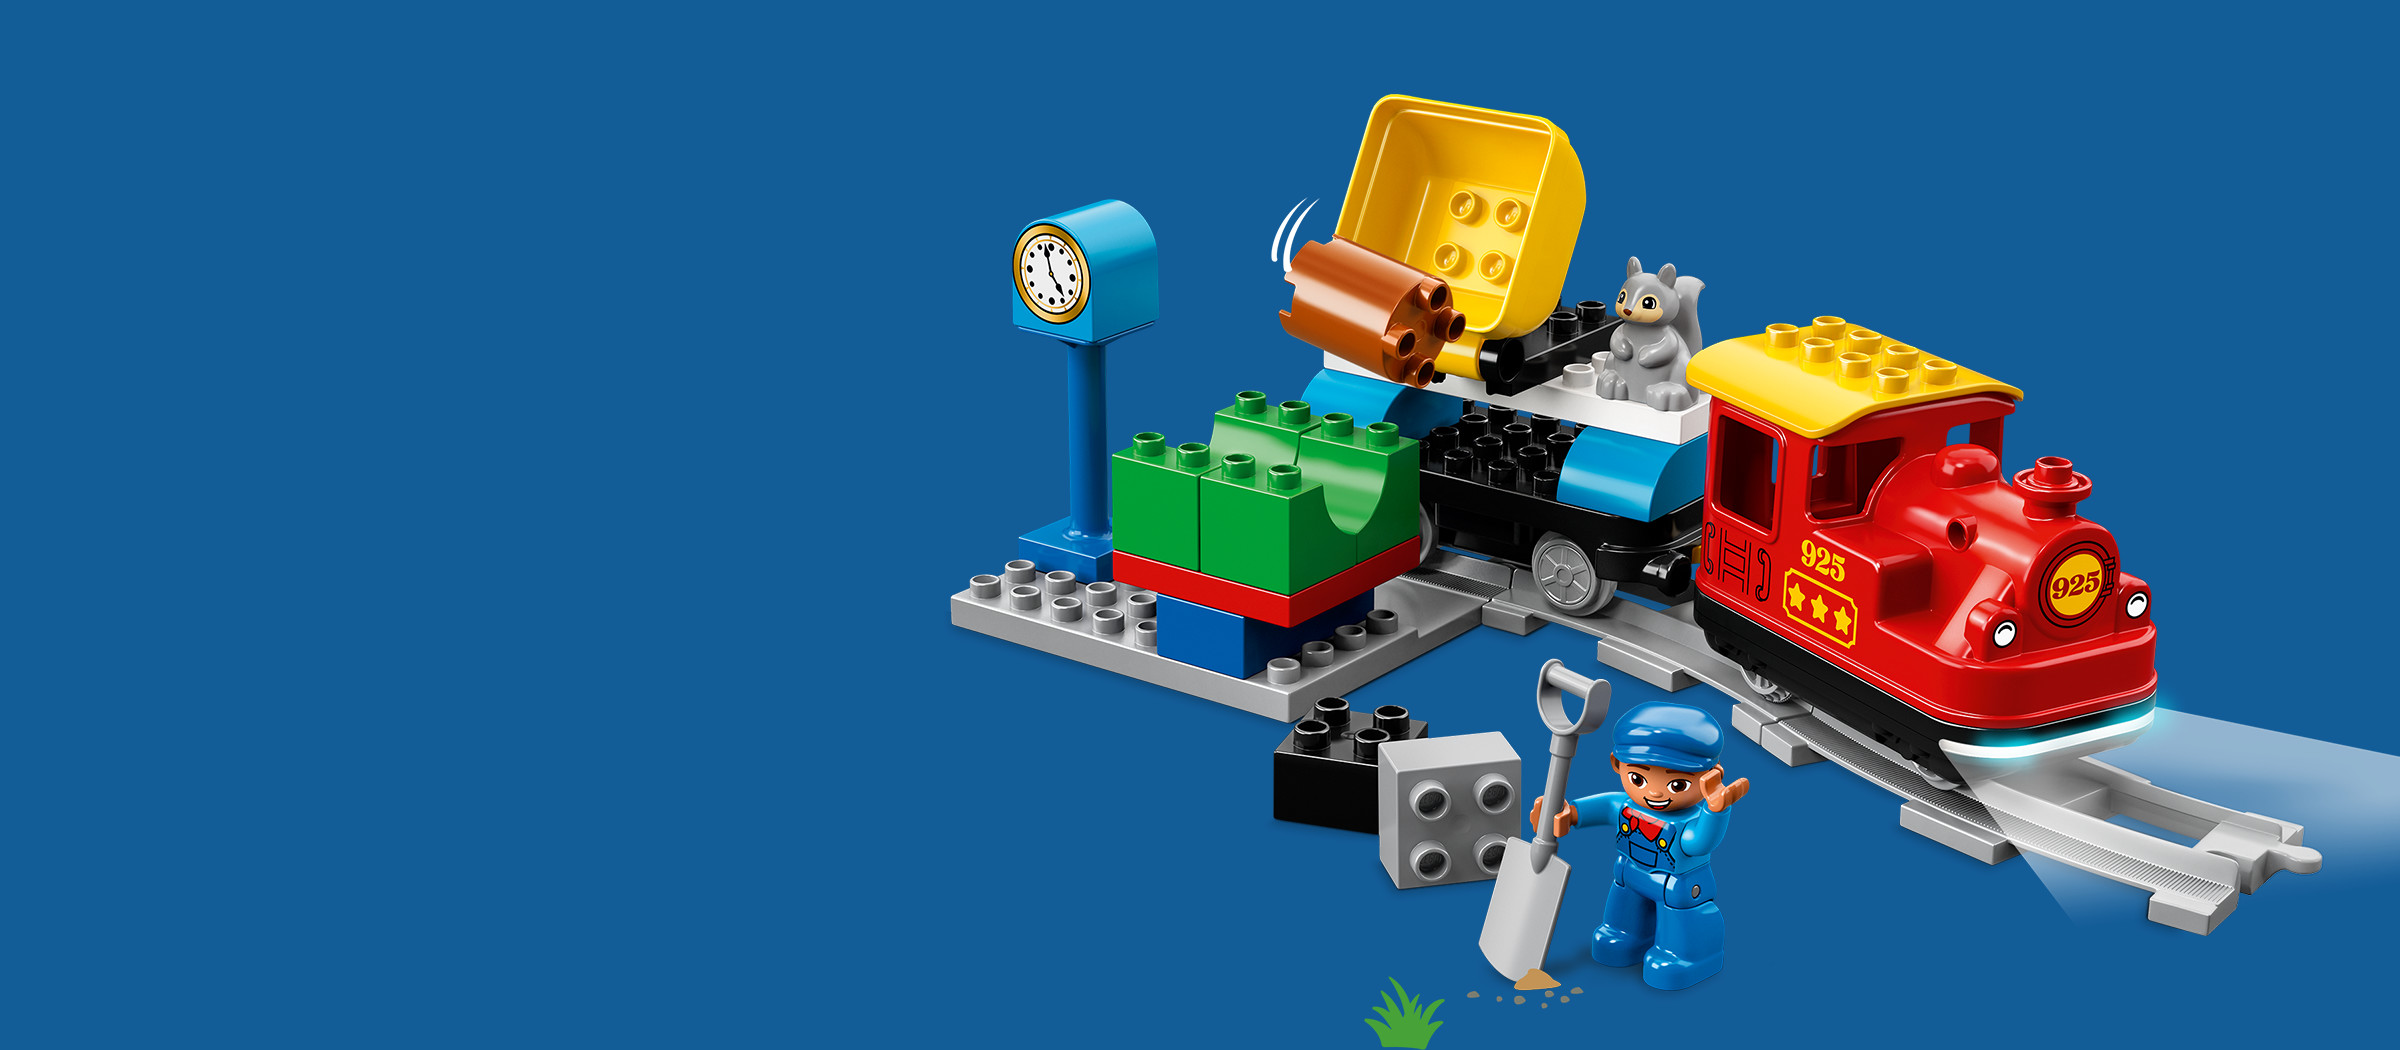 lego train for toddlers